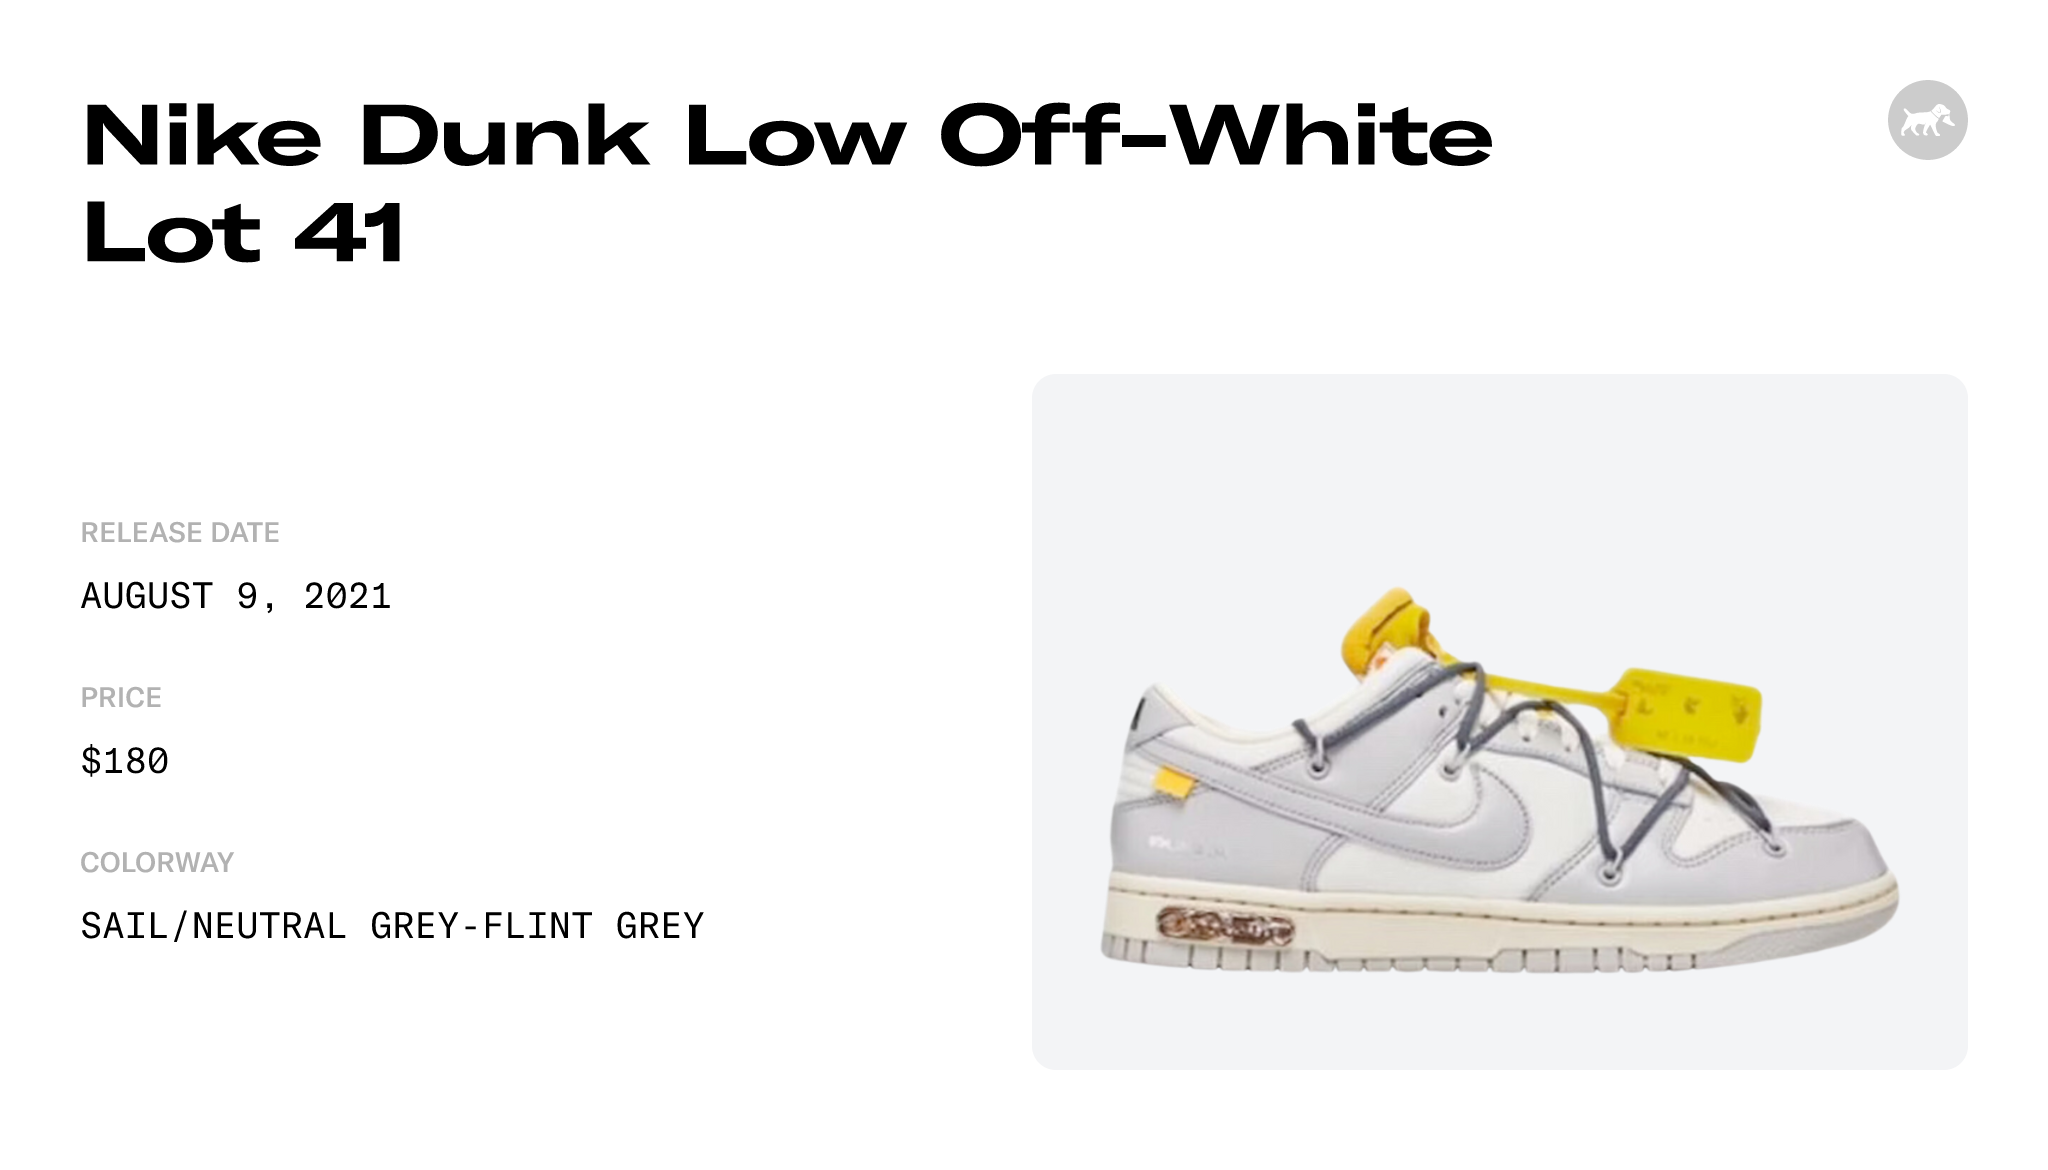 Off-White x Dunk Low 'Lot 41 of 50' DM1602-105